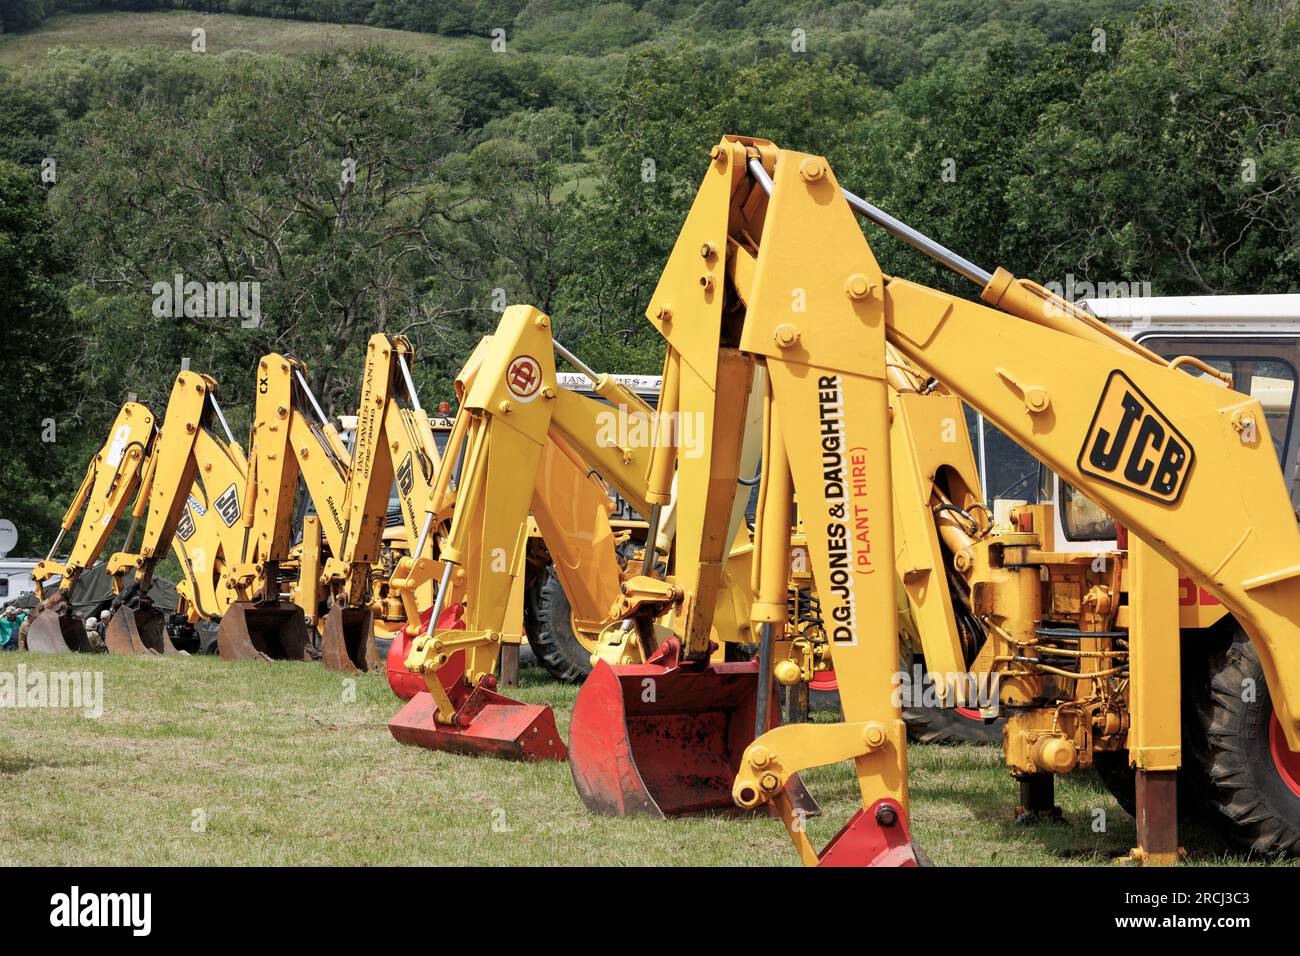 A row of JCB diggers at the Neath Steam and Vintage show Neath and Port Talbot Wales Stock Photo